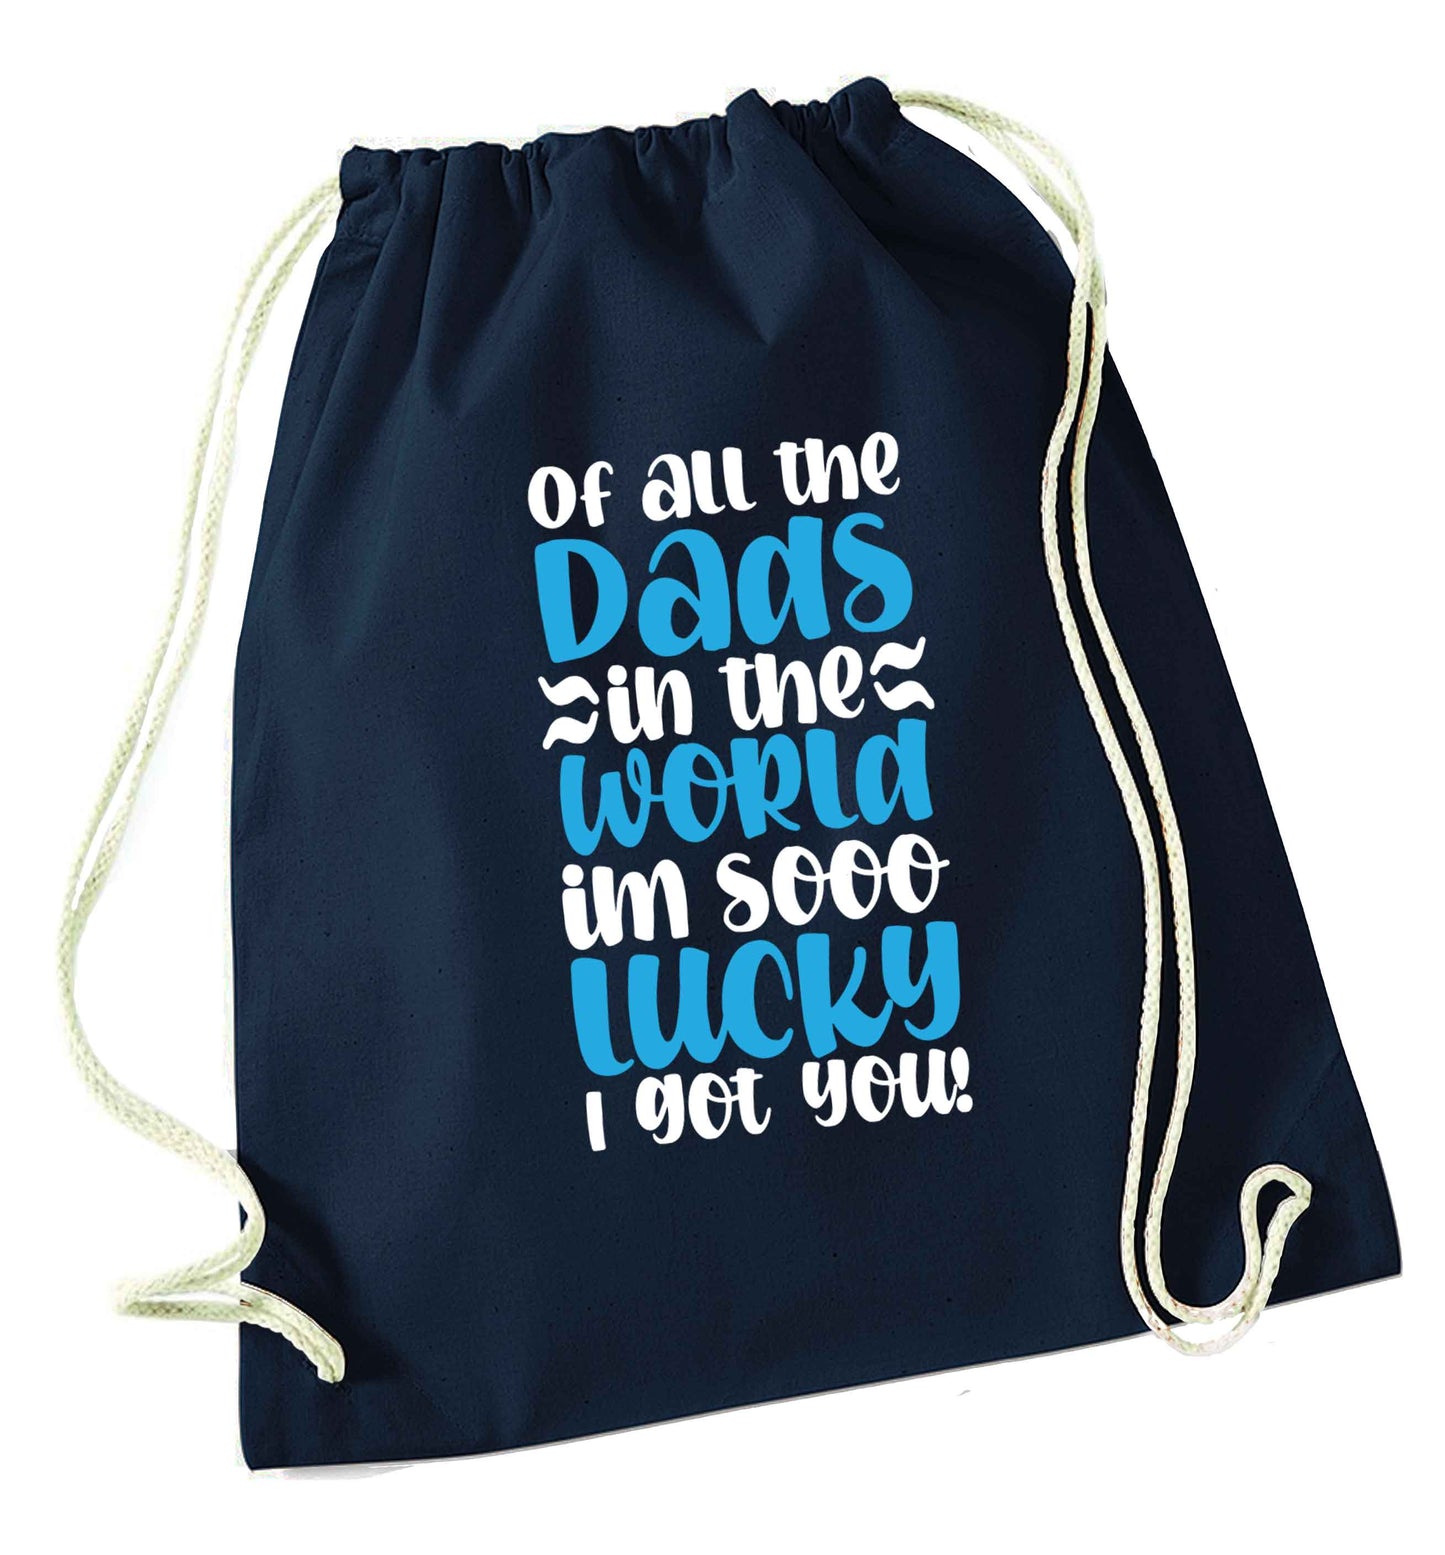 Of all the Dads in the world I'm so lucky I got you navy drawstring bag